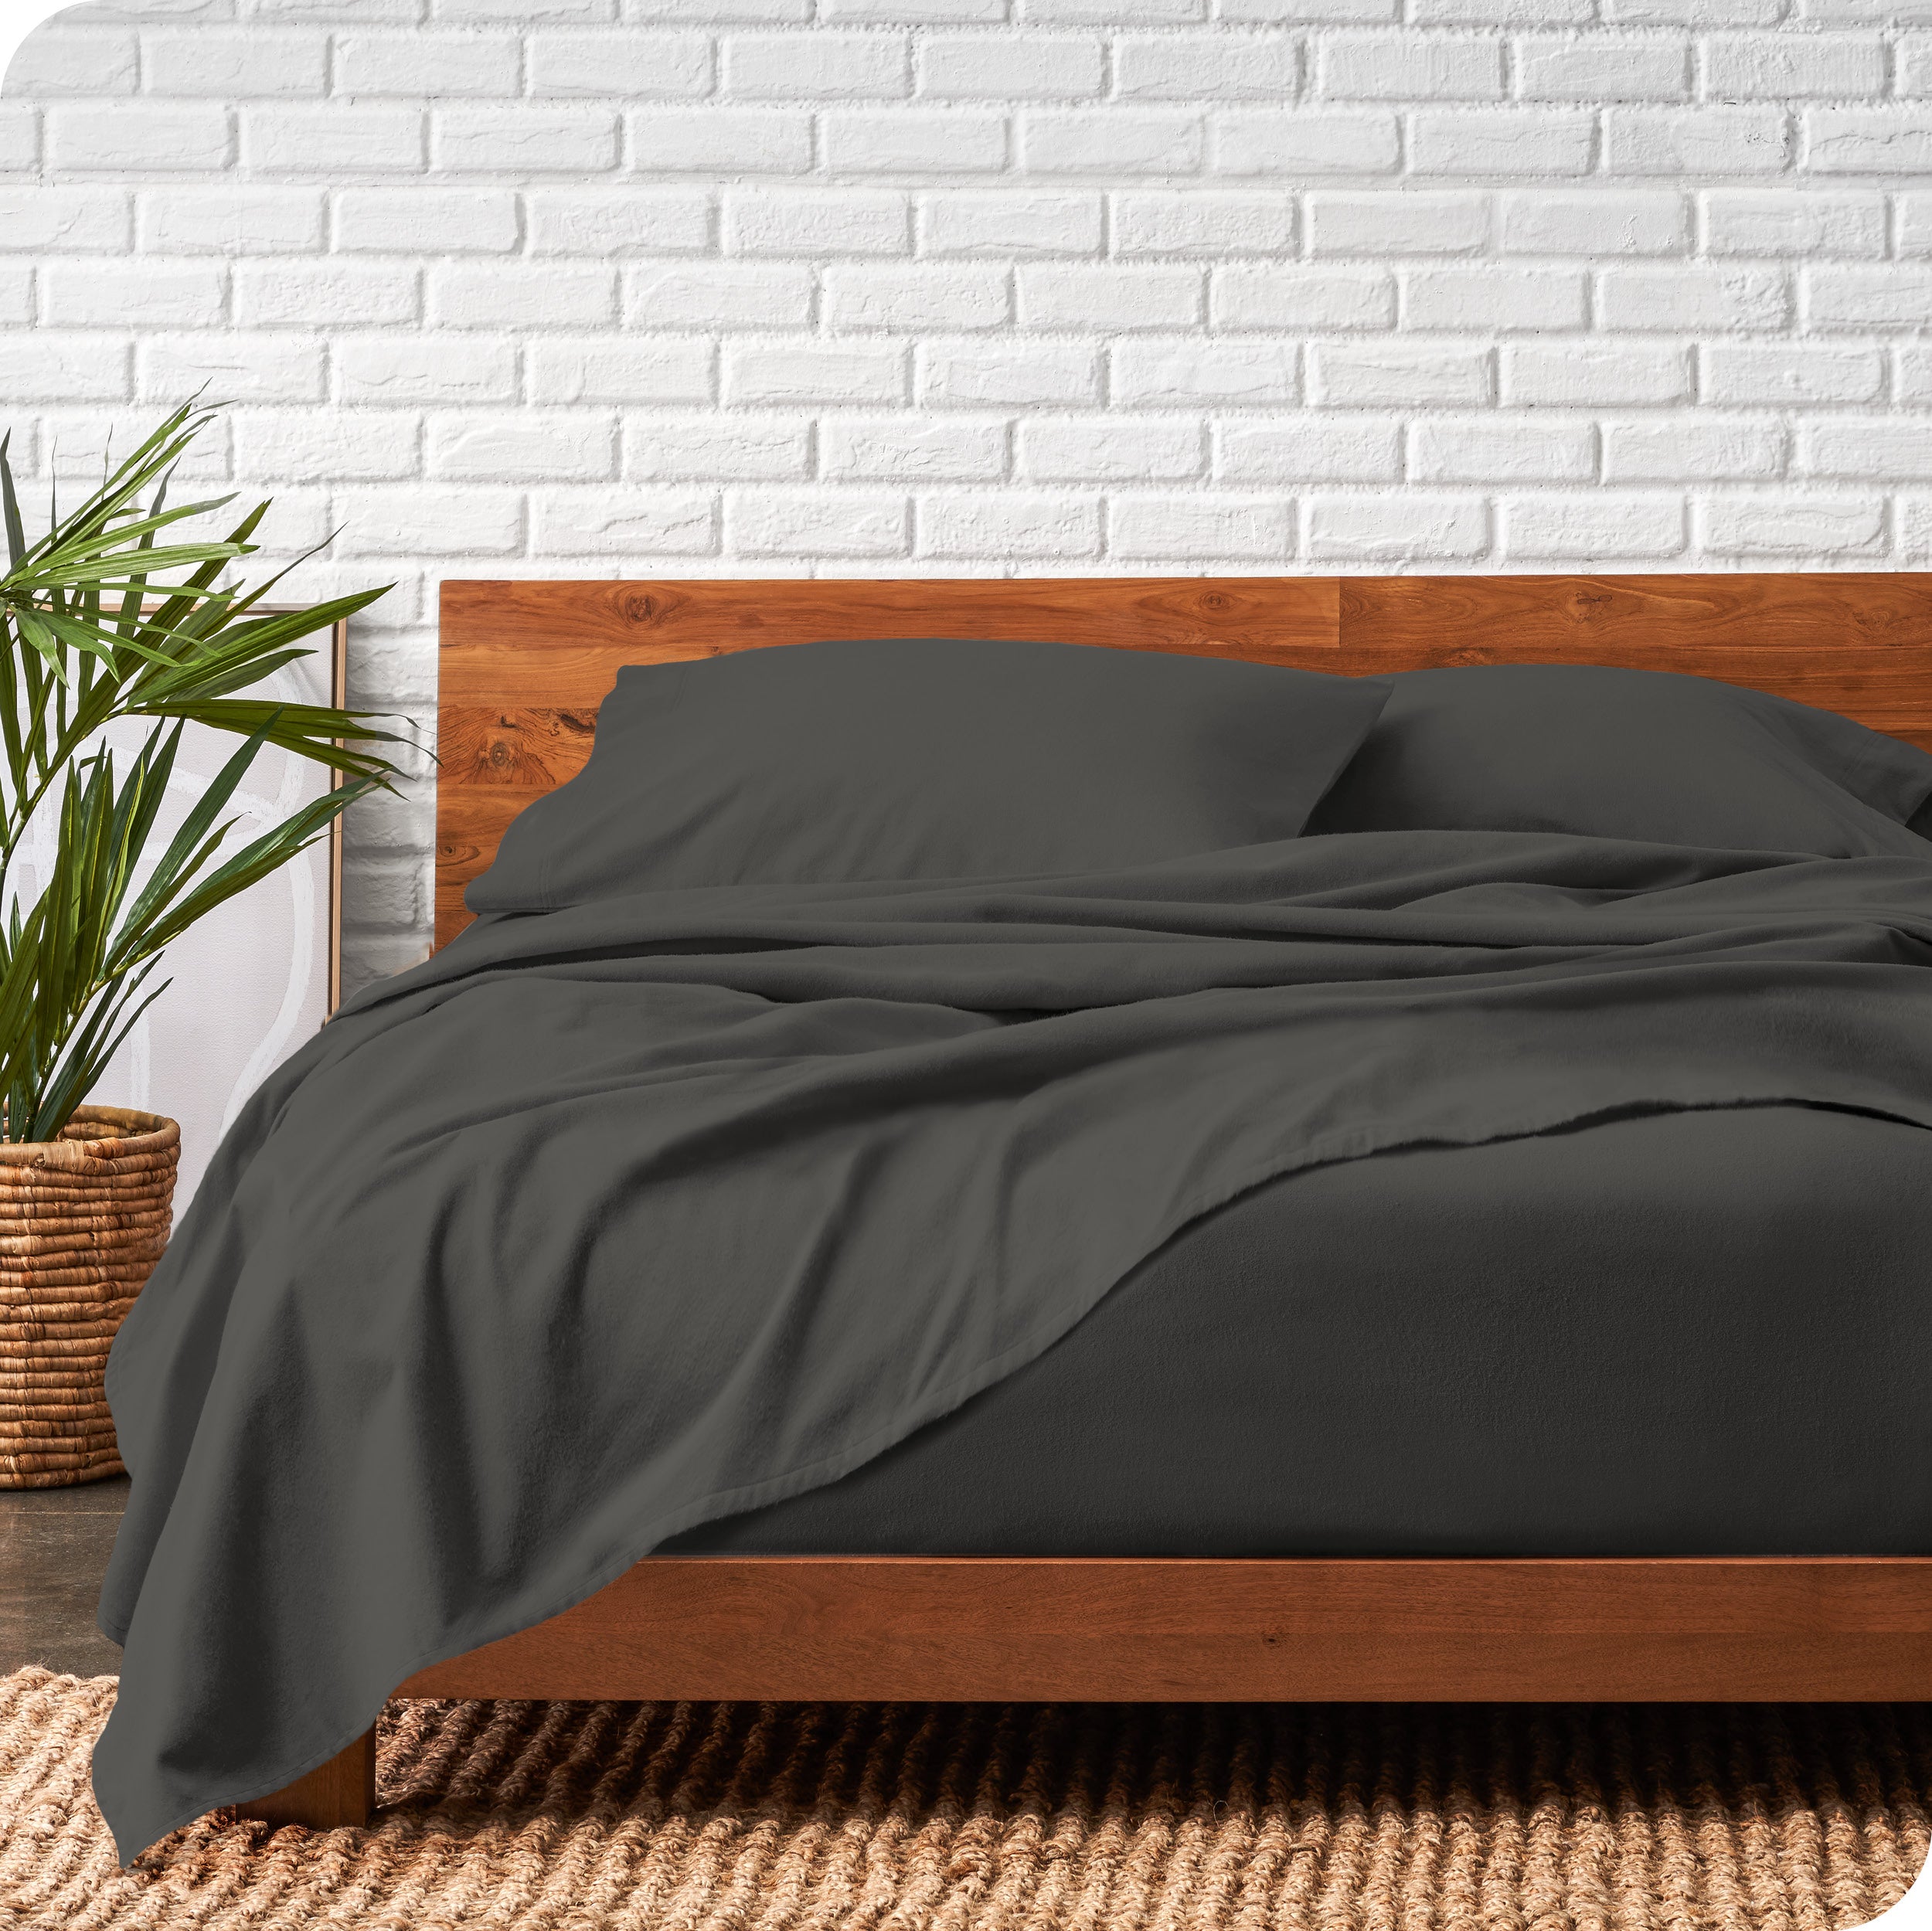 Modern wood bed frame with grey organic flannel sheets and pillowcases